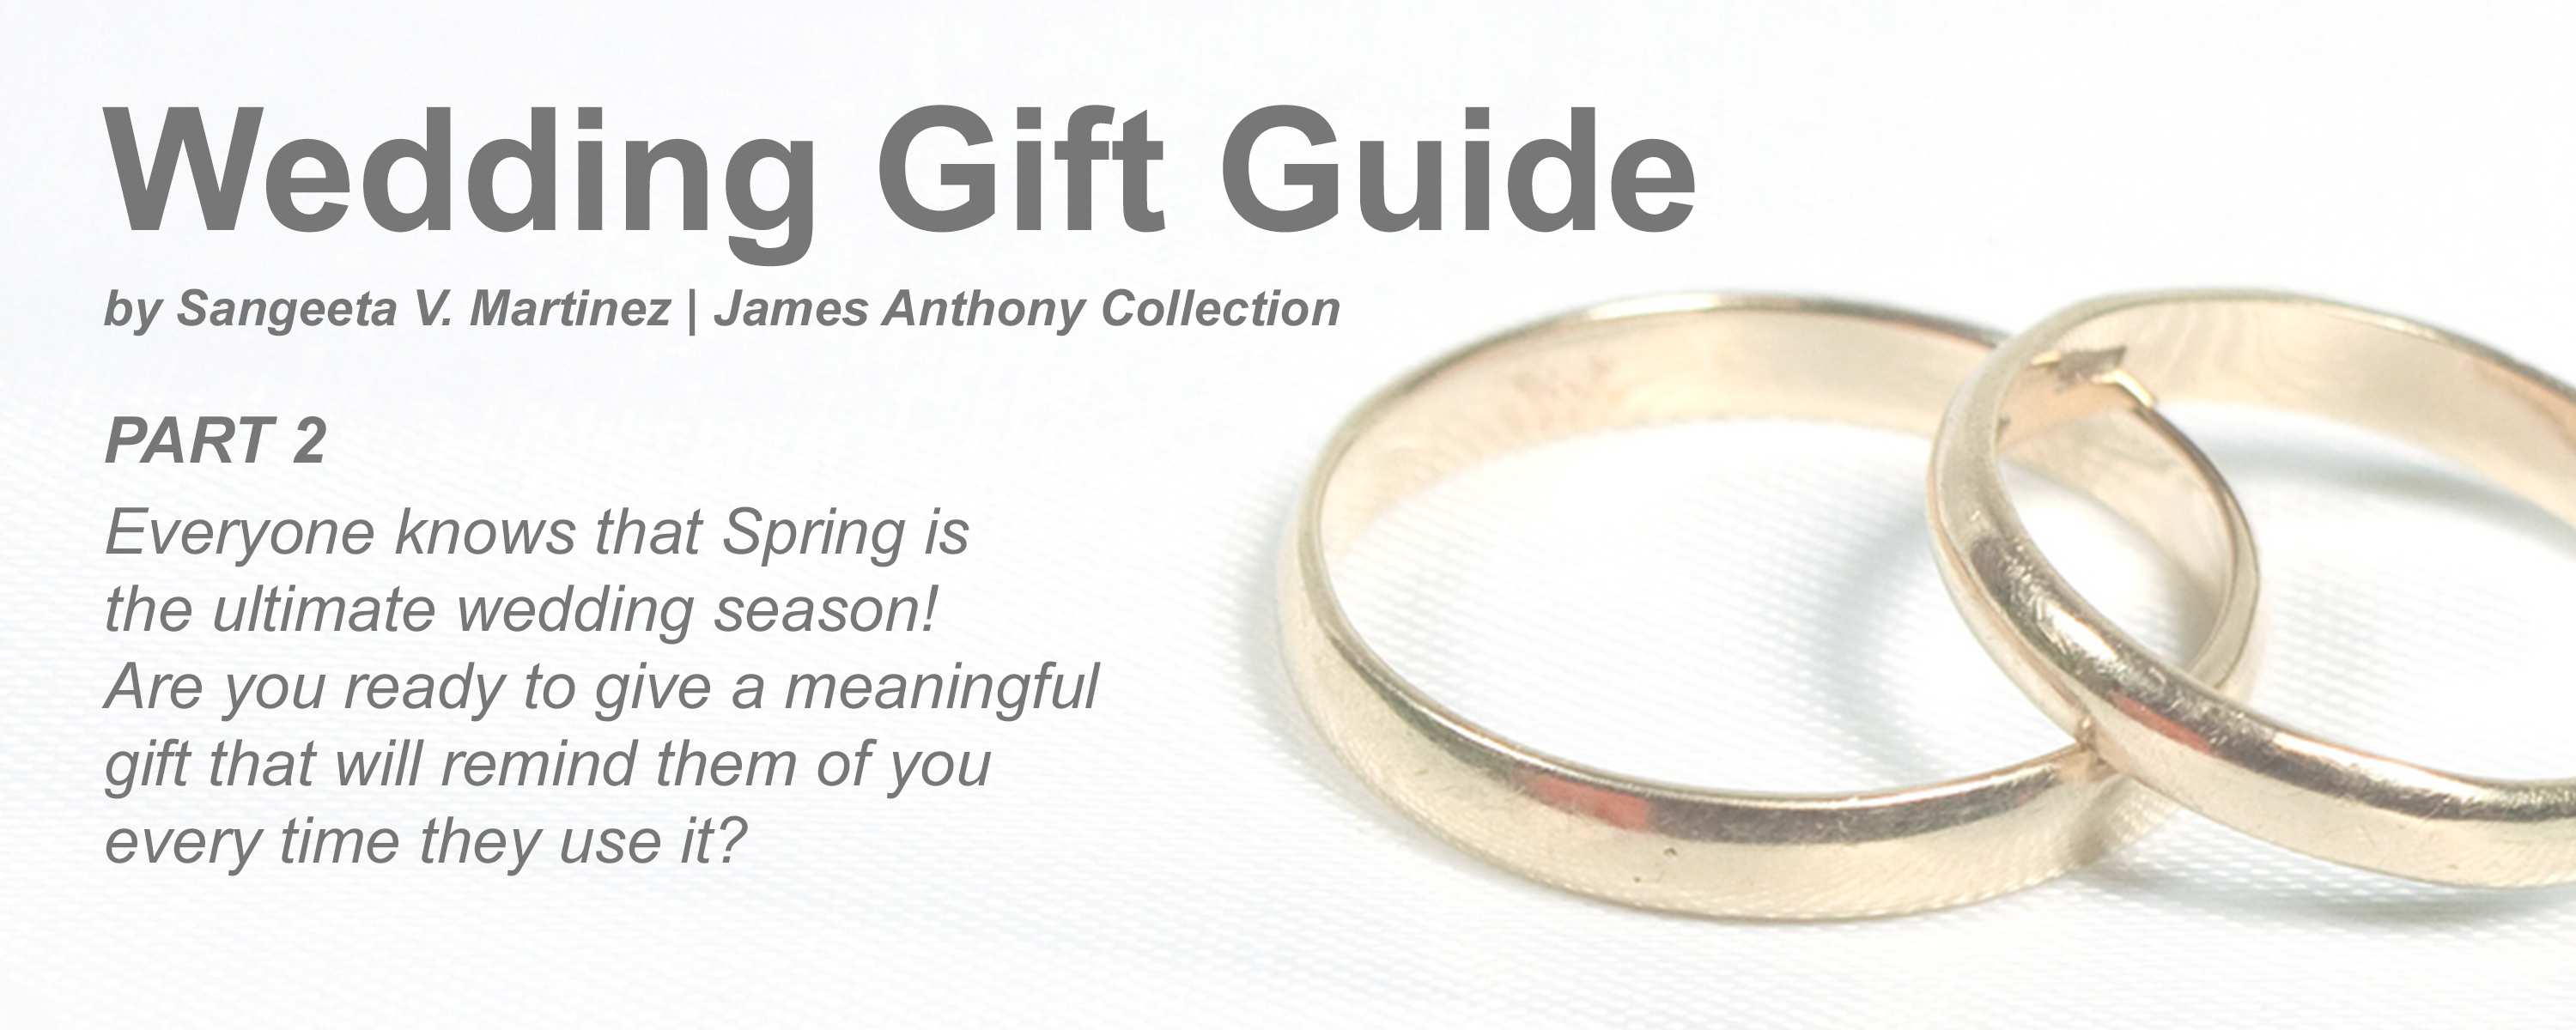 Wedding Gift Guide Part 2 : For the Groomsmen | James Anthony Collection